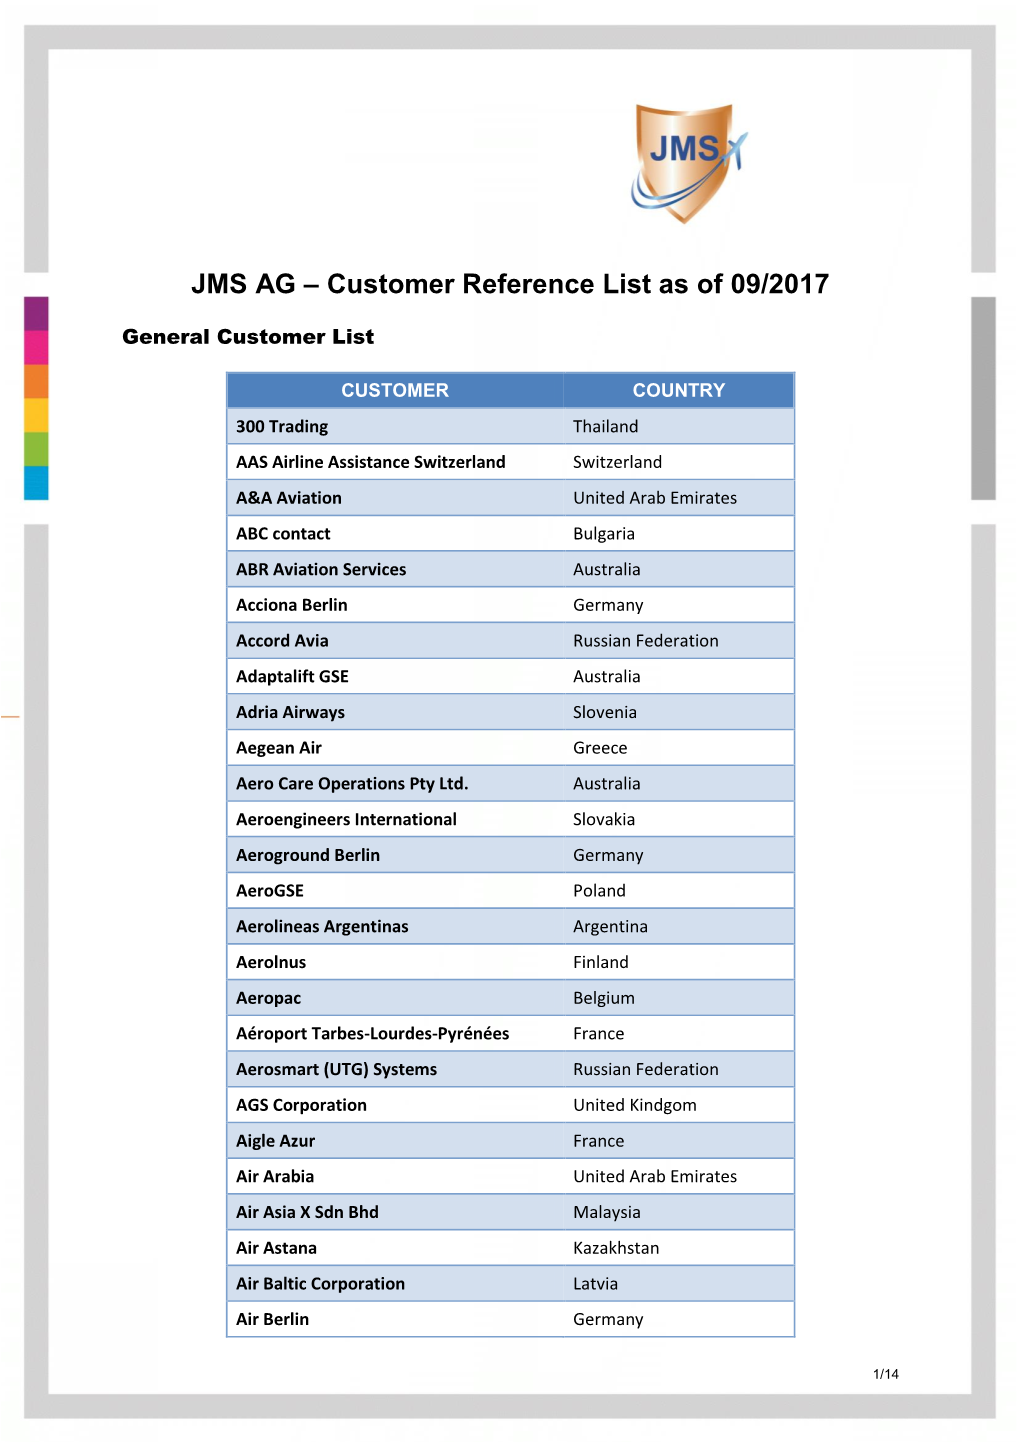 Customer Reference List As of 09/2017